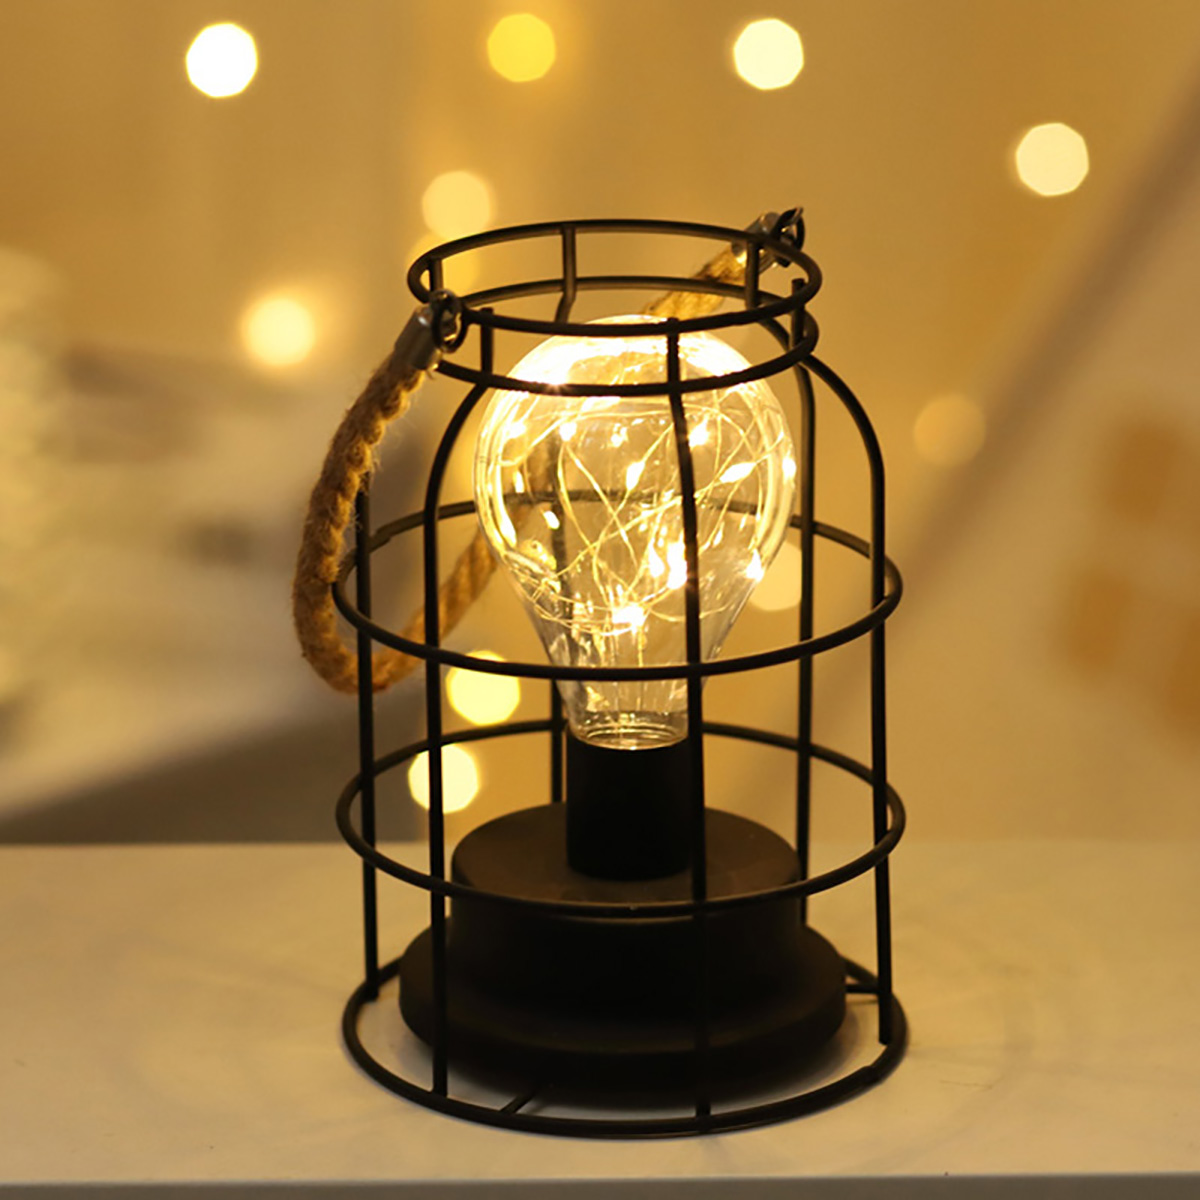 Retro-Cage-Light-Mini-Metal-Battery-Powered-LED-Bulb-Lamp-for-Living-Room-Bedroom-Kitchen-Wedding-Ch-1733946-5